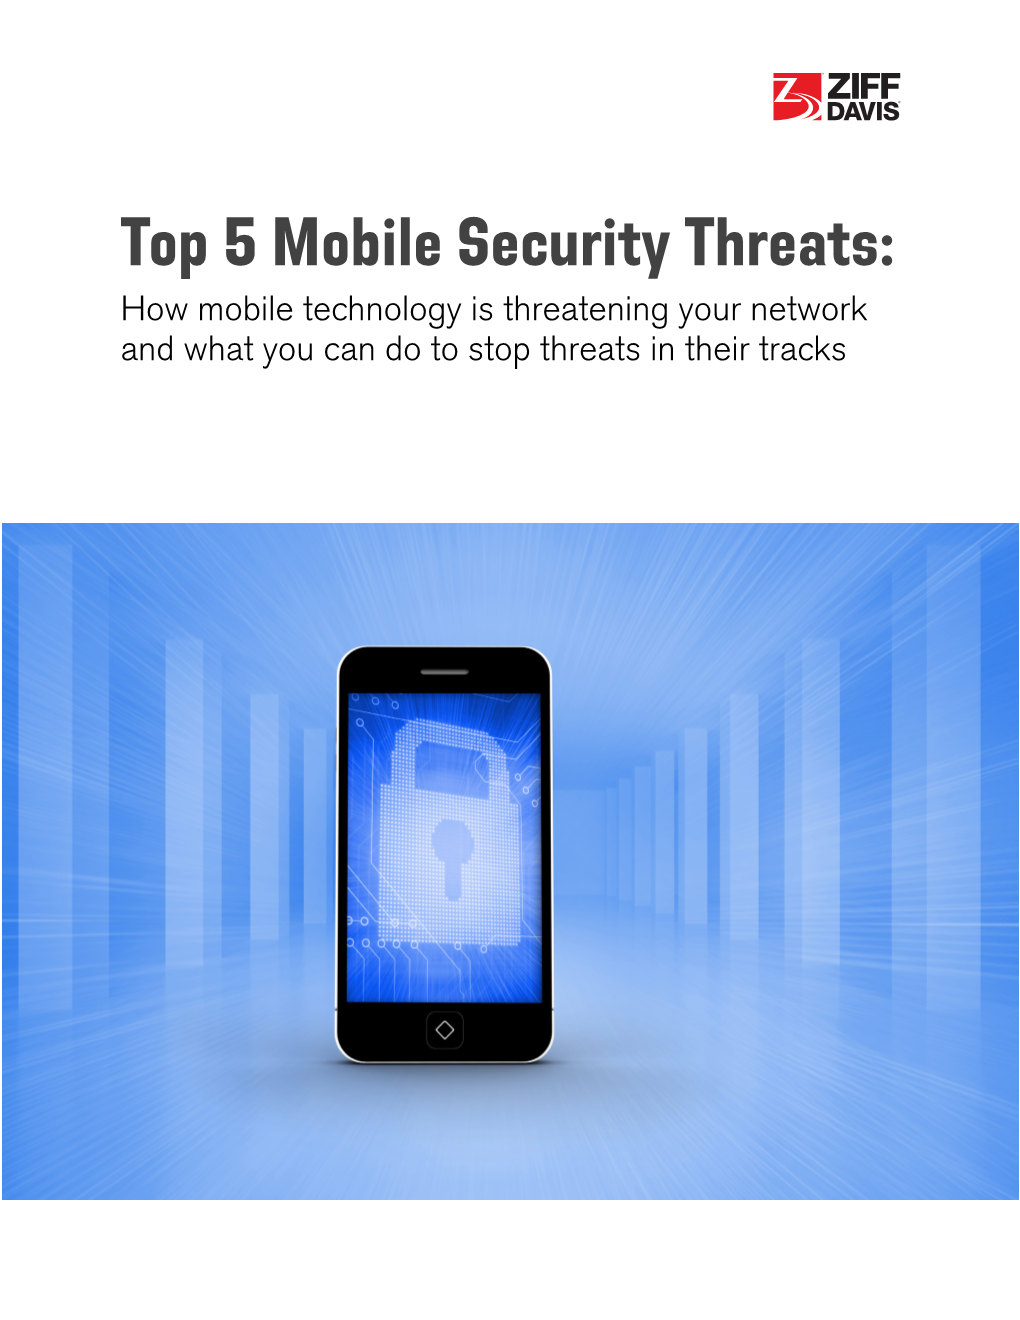 Top 5 Mobile Security Threats: How Mobile Technology Is Threatening Your Network and What You Can Do to Stop Threats in Their Tracks ®